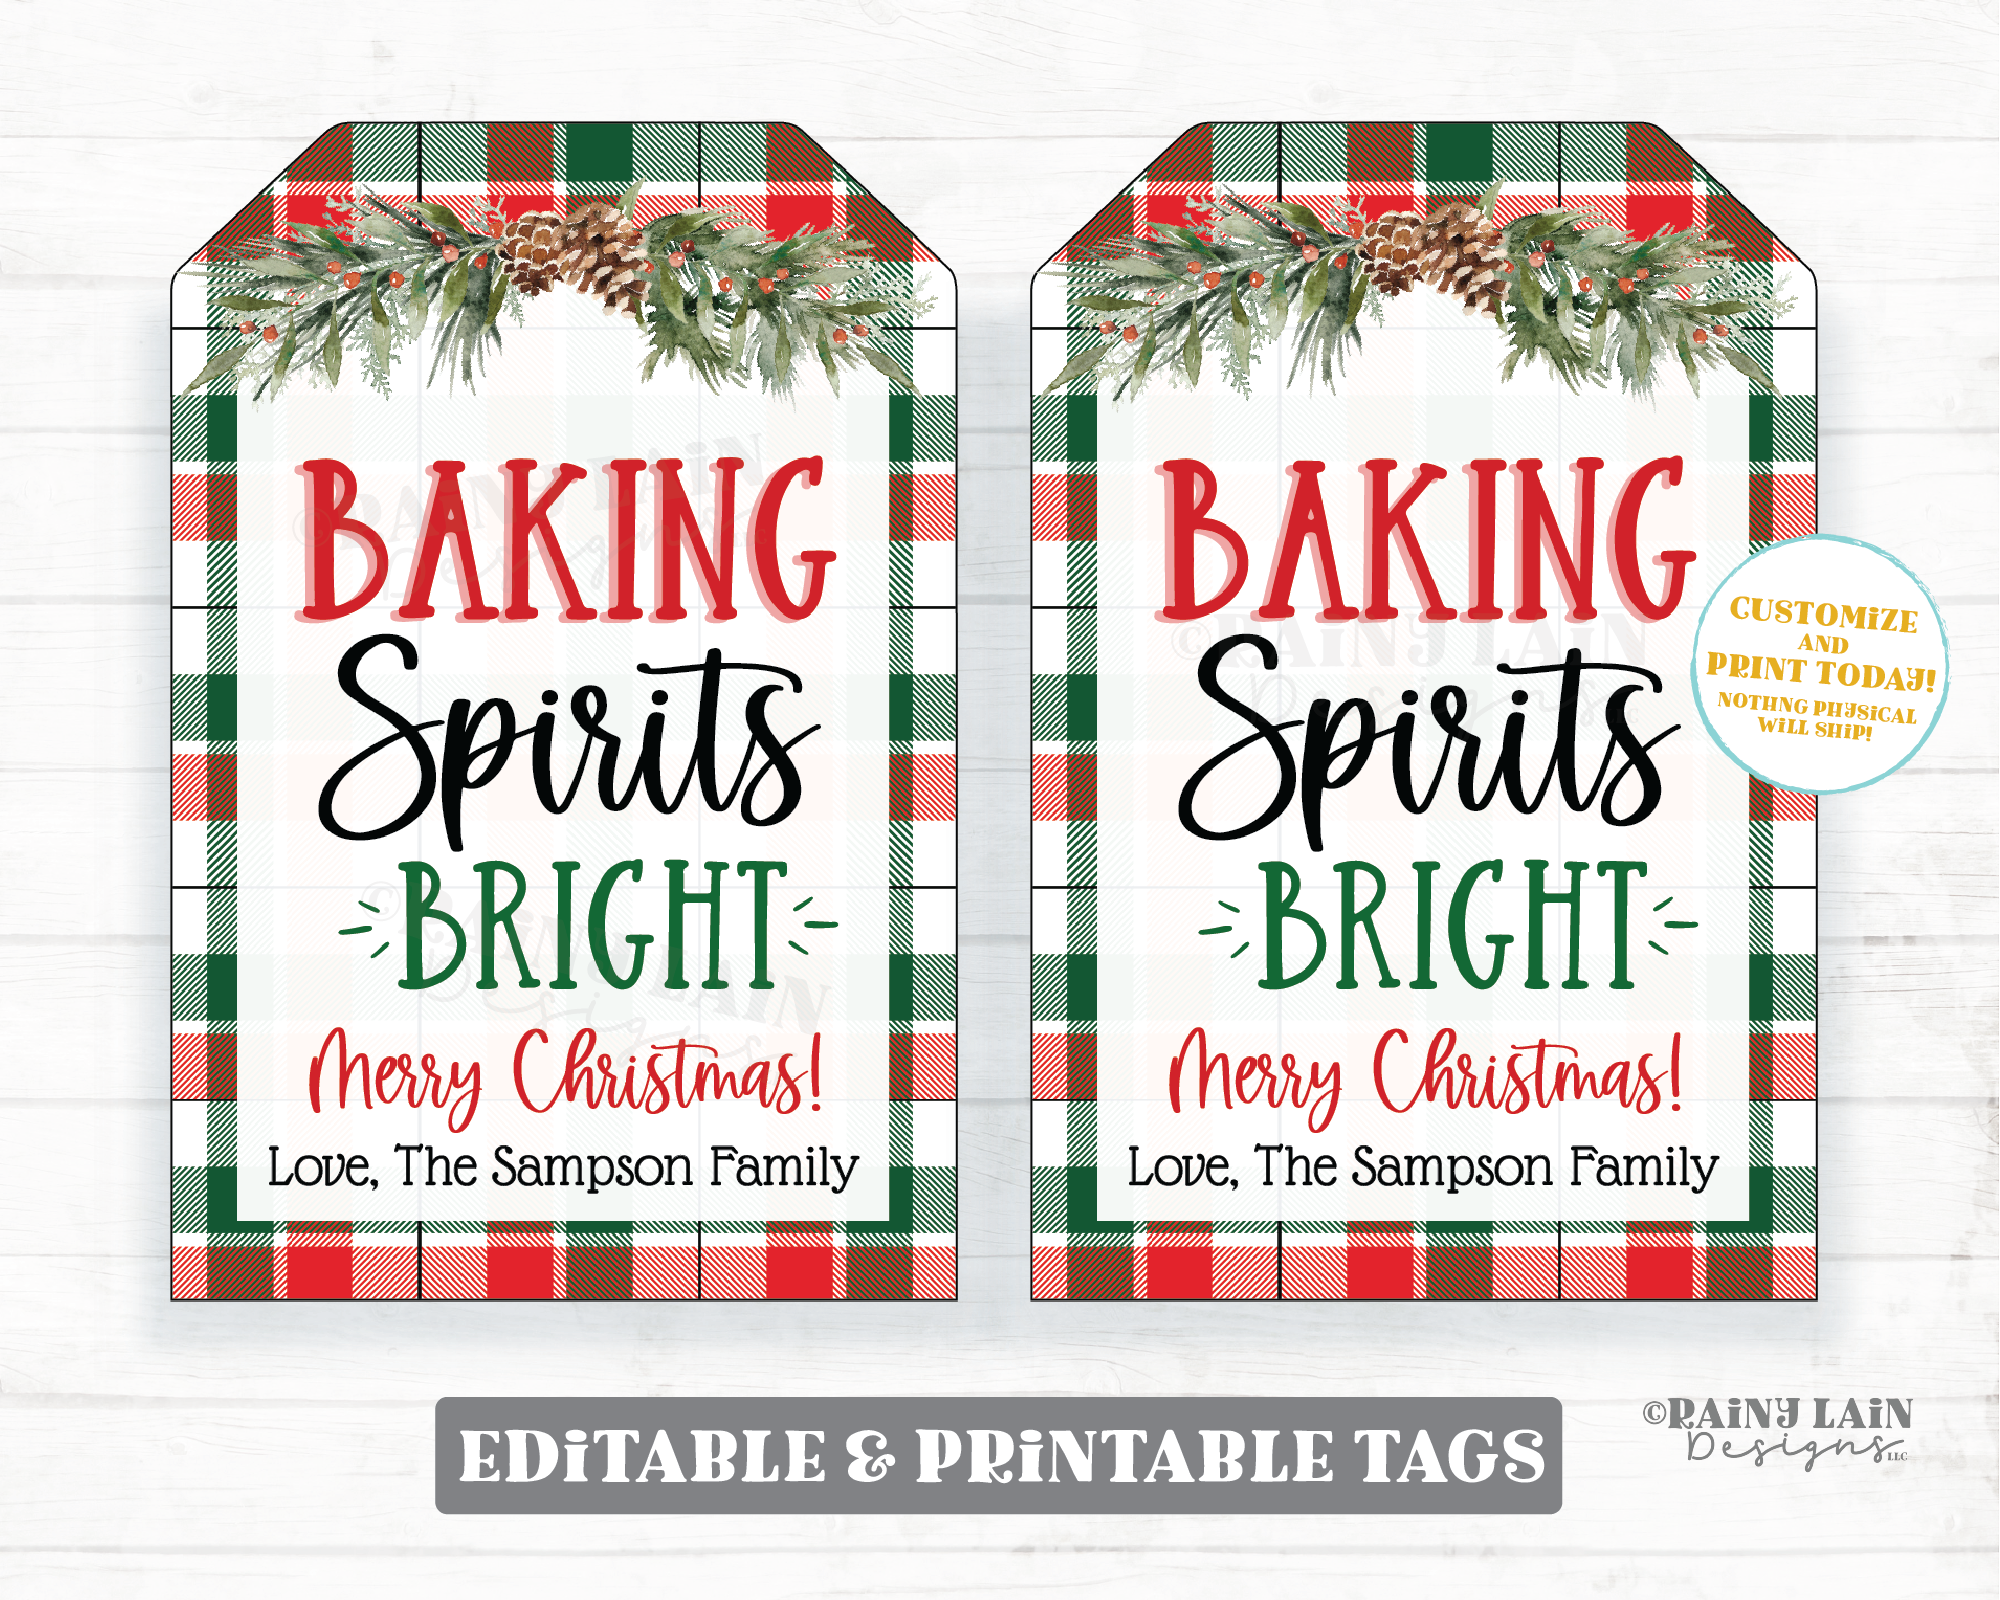 Baking Spirits Bright Tags Christmas Cookies Gift Tag Homemade Baked Goods Neighbor Holiday Gift Teacher Coach Co-worker Plaid Gift Tags